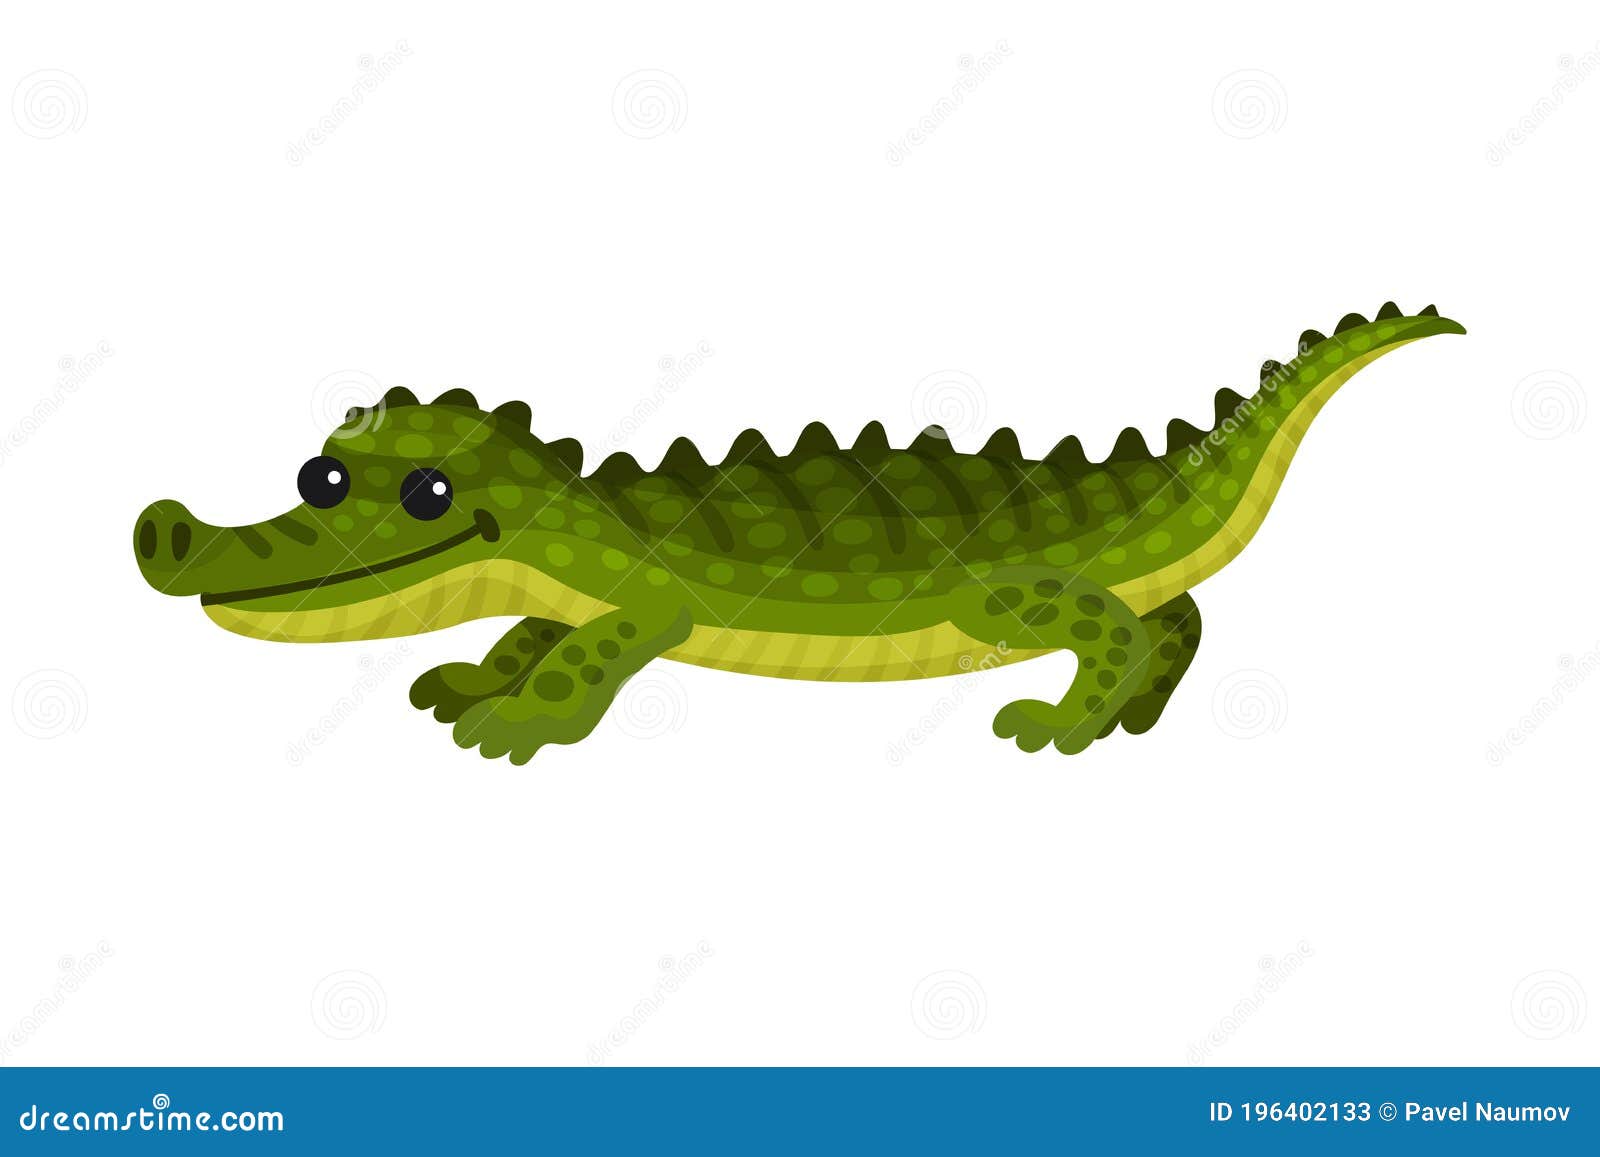 Alligator Crocodile with Long Tail and Sharp Teeth As African Animal Vector  Illustration Stock Vector - Illustration of creature, muzzle: 196402133